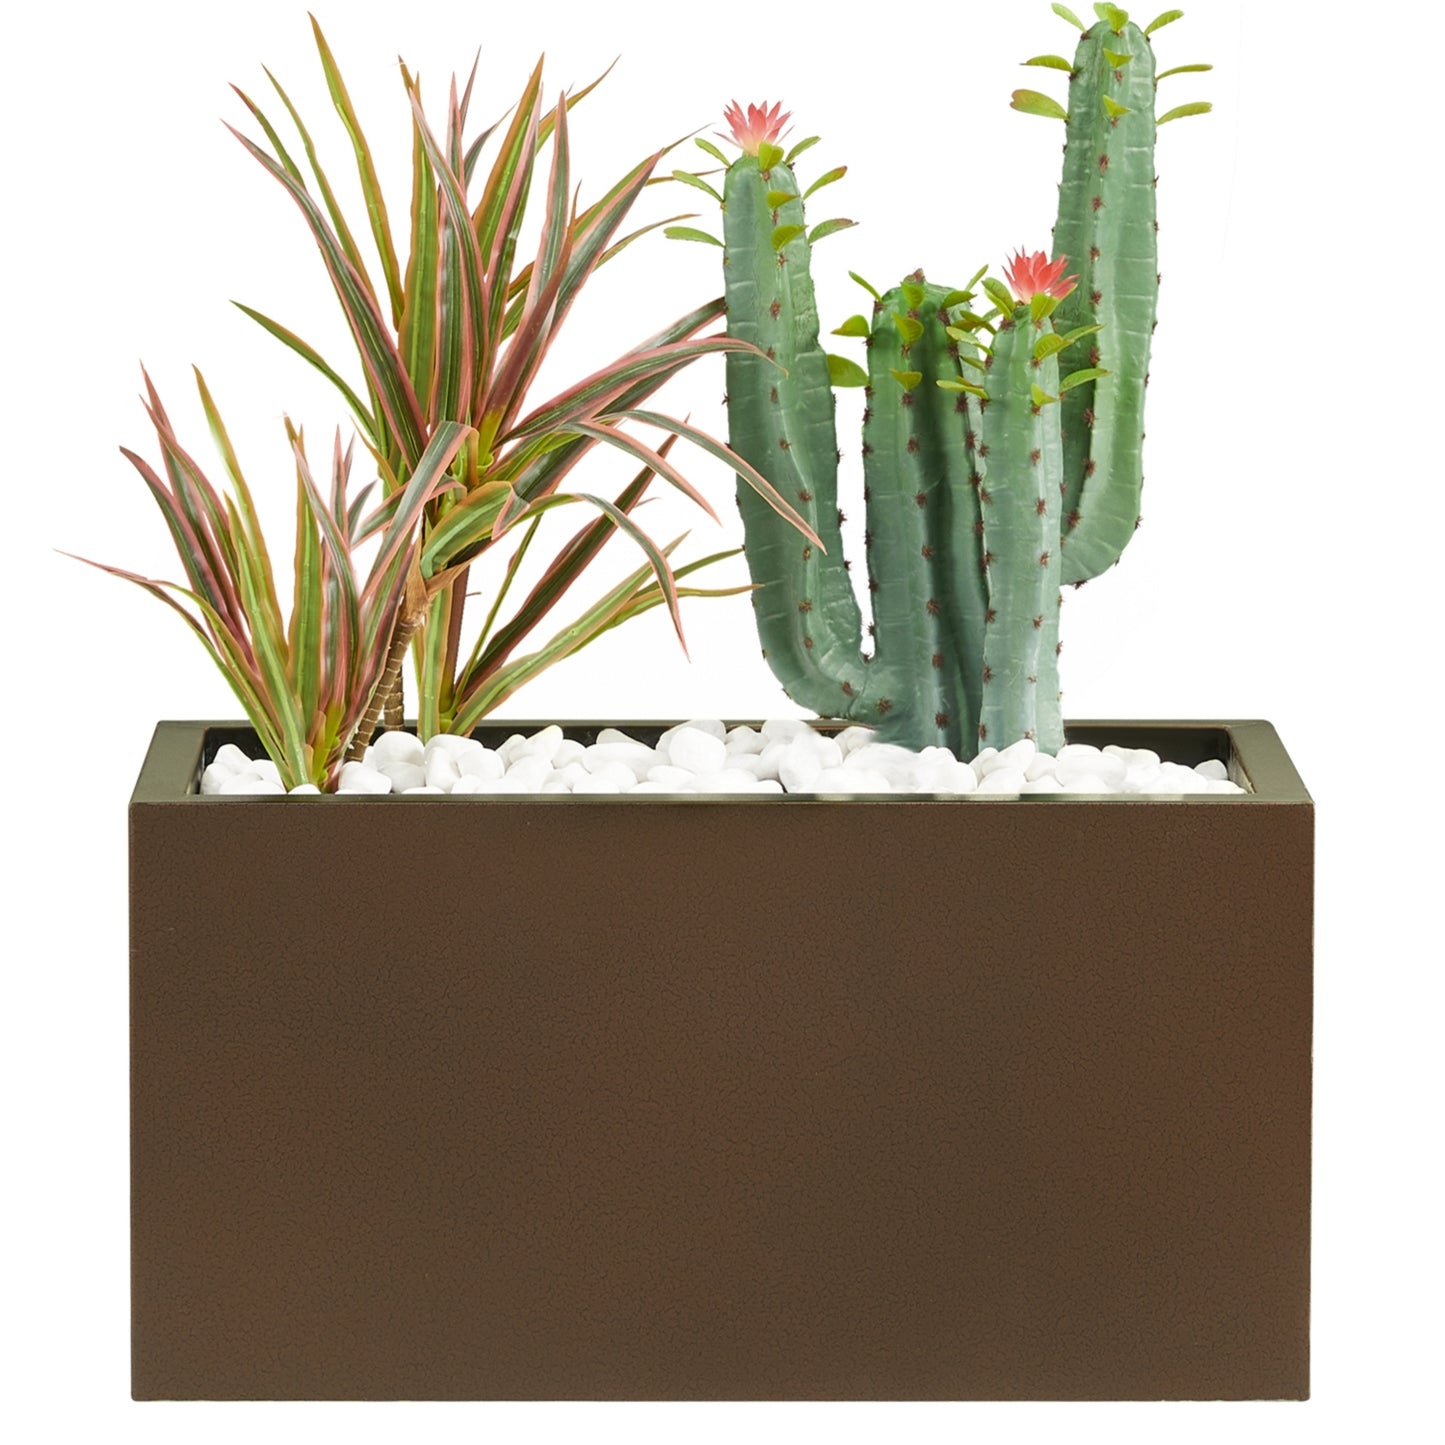 Small Size Rectangle Planter Box for Outdoor/Indoor 25”Lx11”Wx13”H 26lbs Espresso